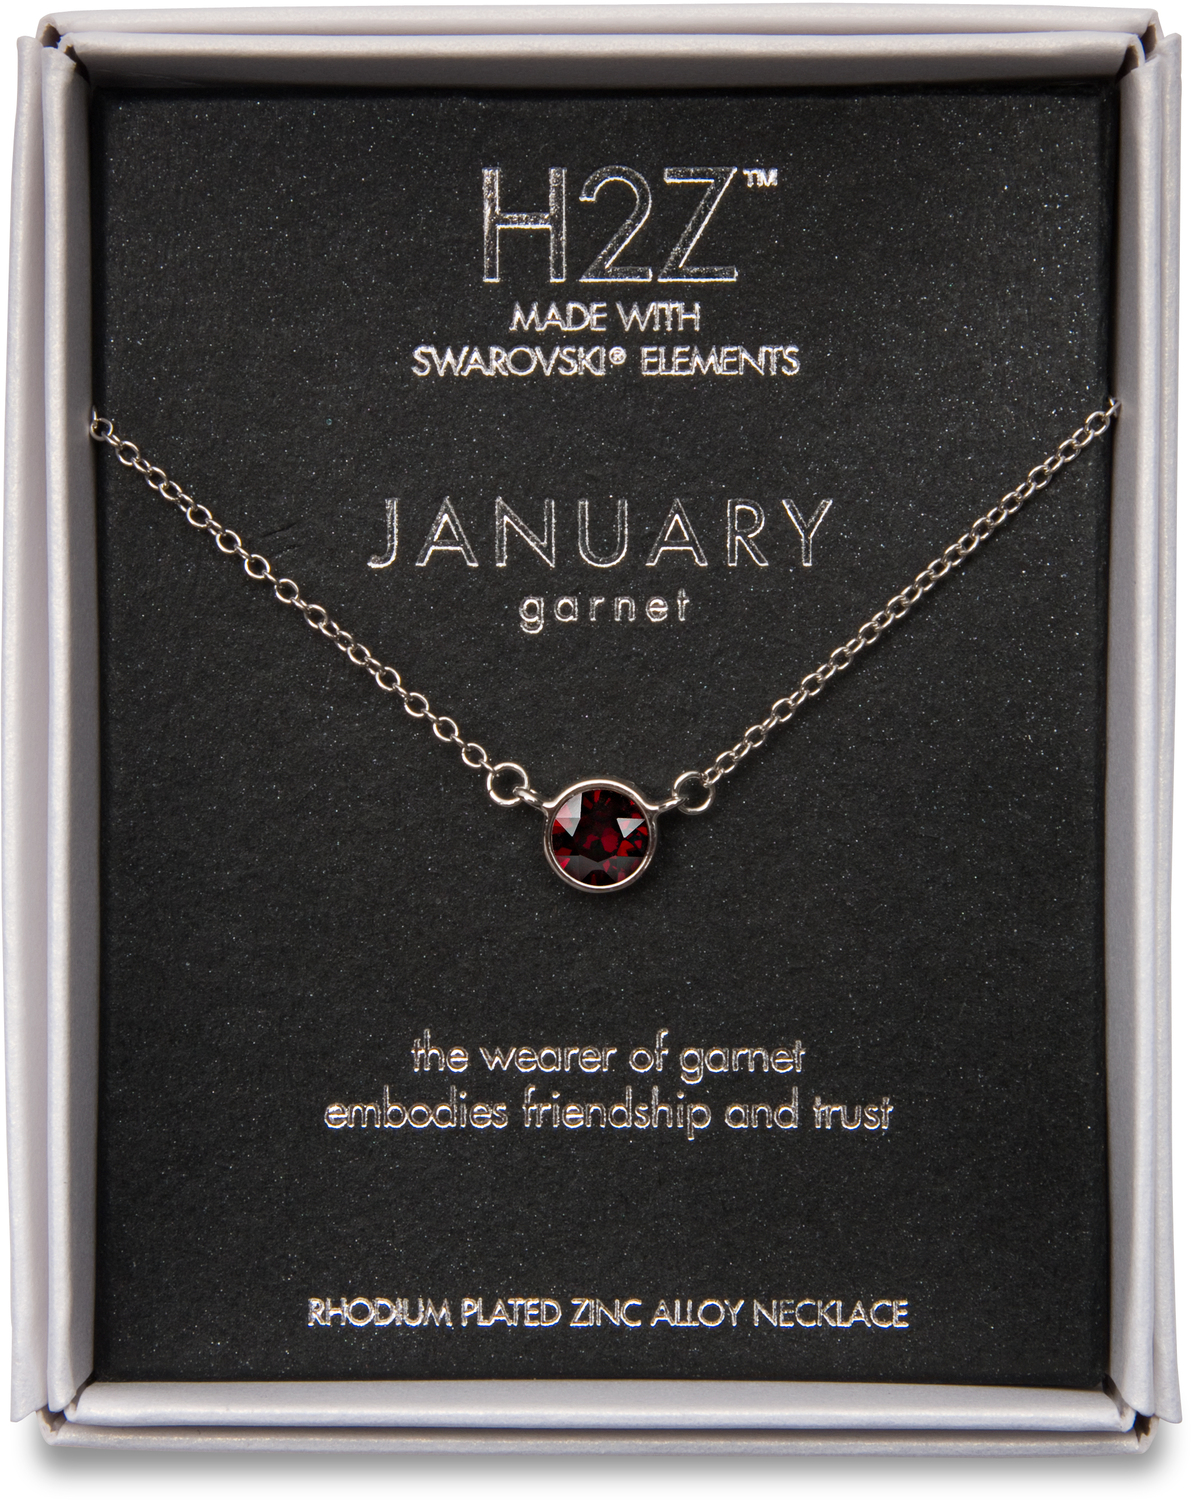 Liza Birthstone January Garnet by H2Z Made with Swarovski Elements - Liza Birthstone January Garnet - 17"-18.5" Necklace with 0.25" Crystal Pendant made from Austrian Crystals